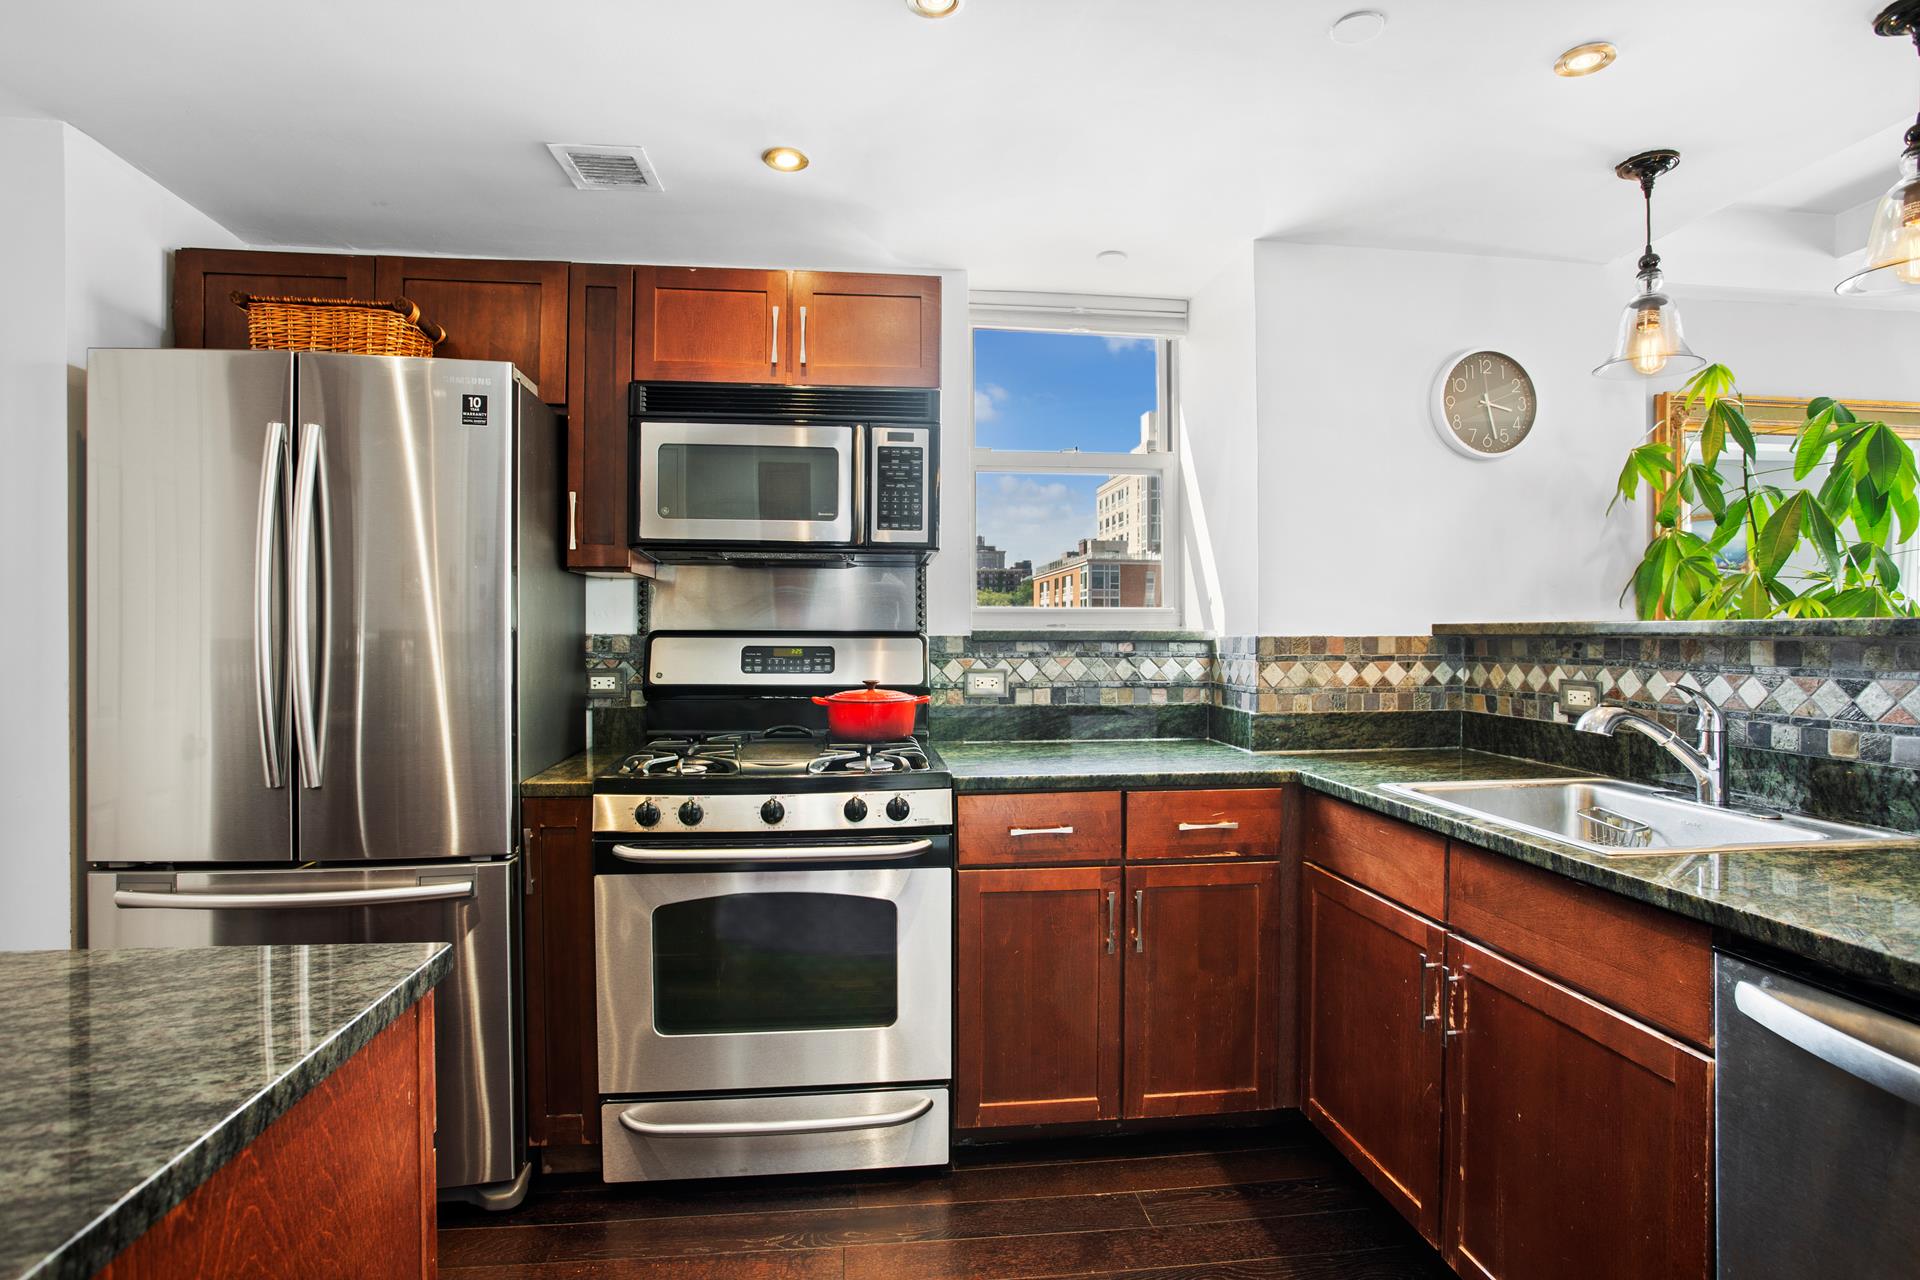 266 West 115th Street 7A, South Harlem, Upper Manhattan, NYC - 2 Bedrooms  
2 Bathrooms  
4 Rooms - 